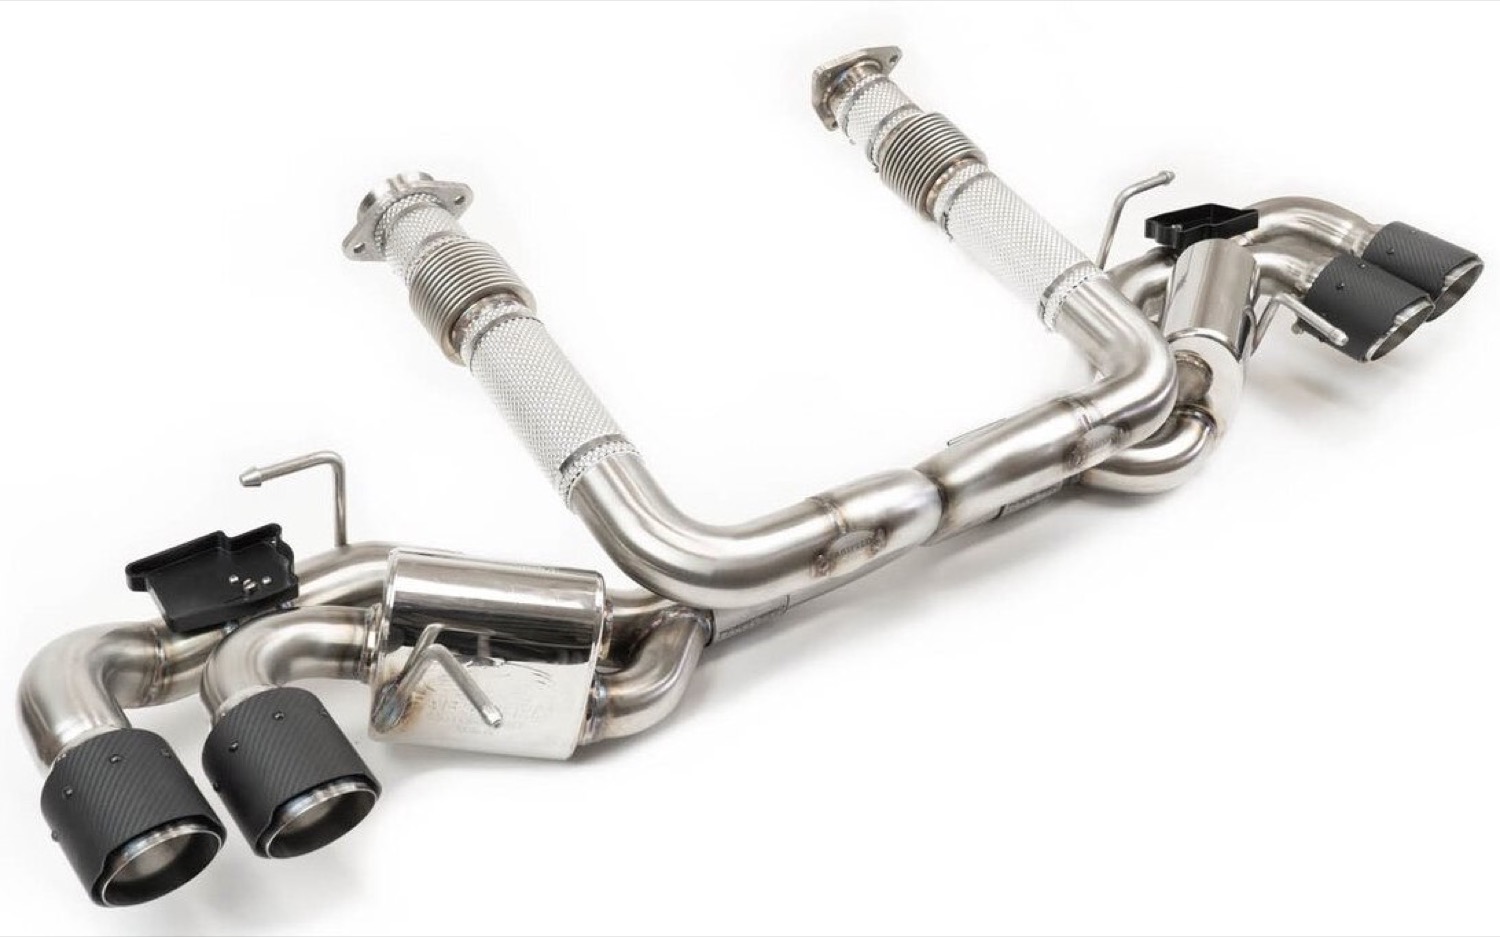 New C8 Corvette Exhaust Offered By Fabspeed: Video | GM Authority